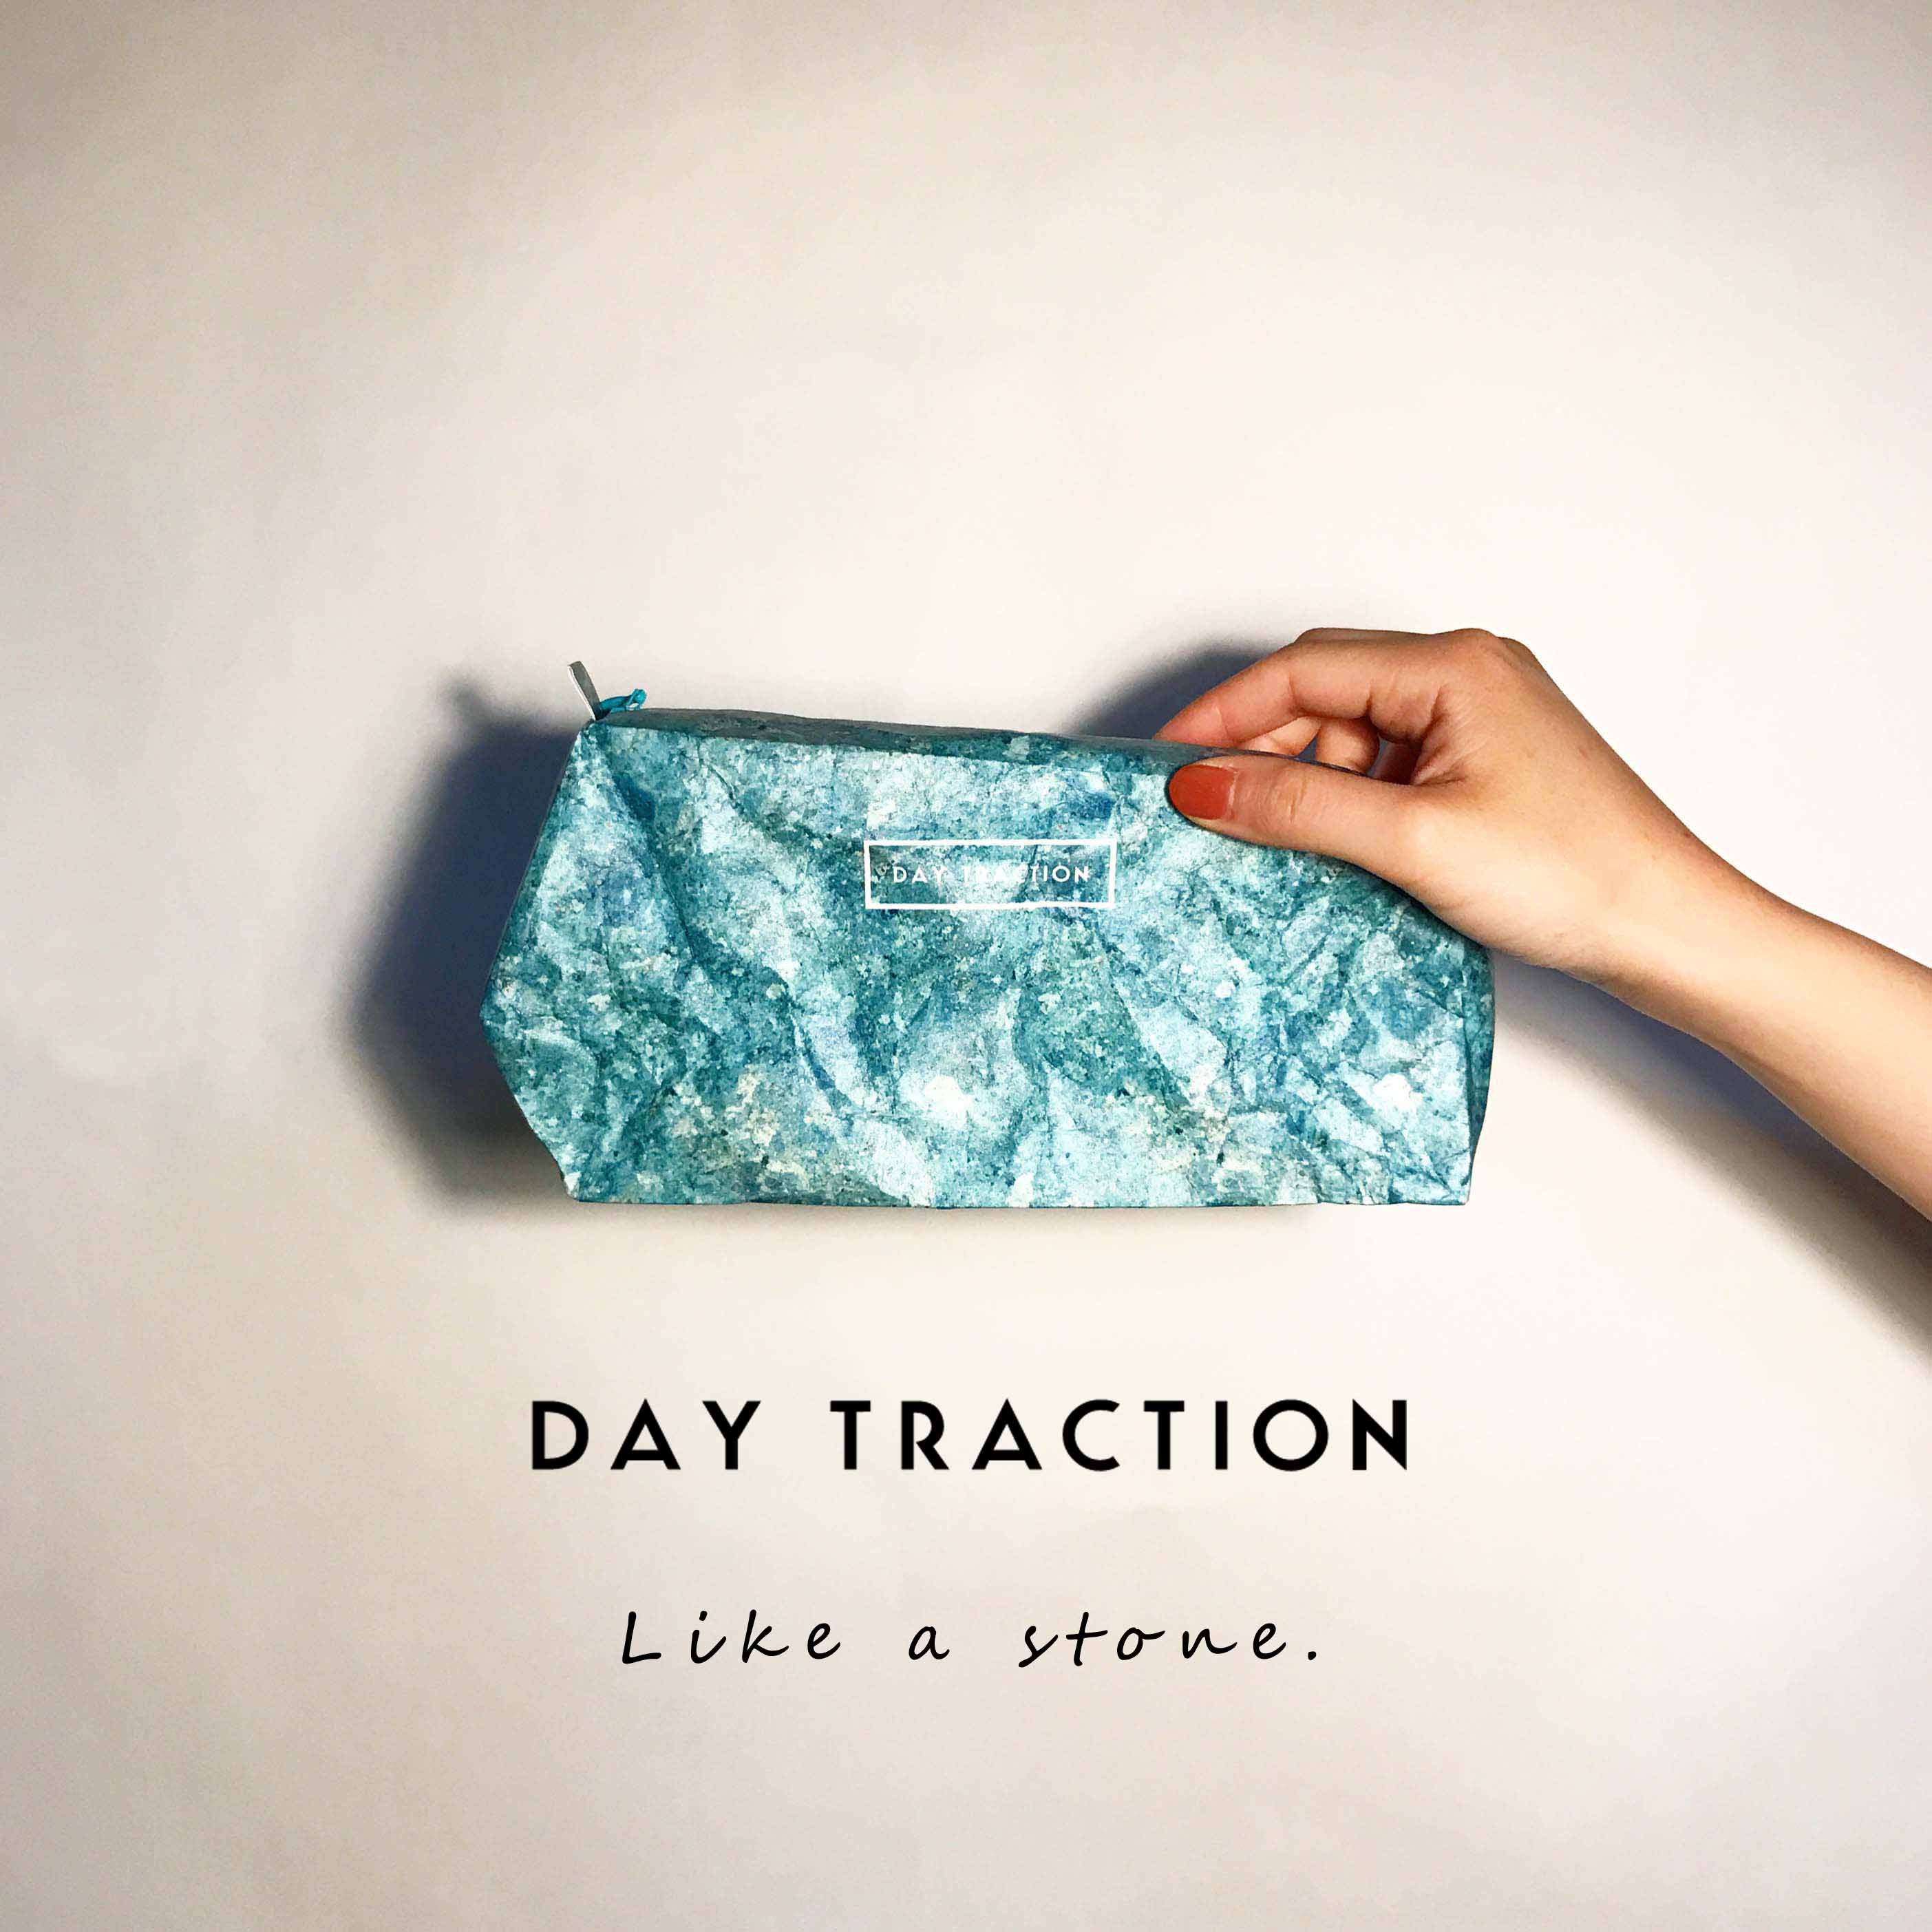 DAY TRACTIONオリジナルの石材のようなポーチ"Like a stone"。